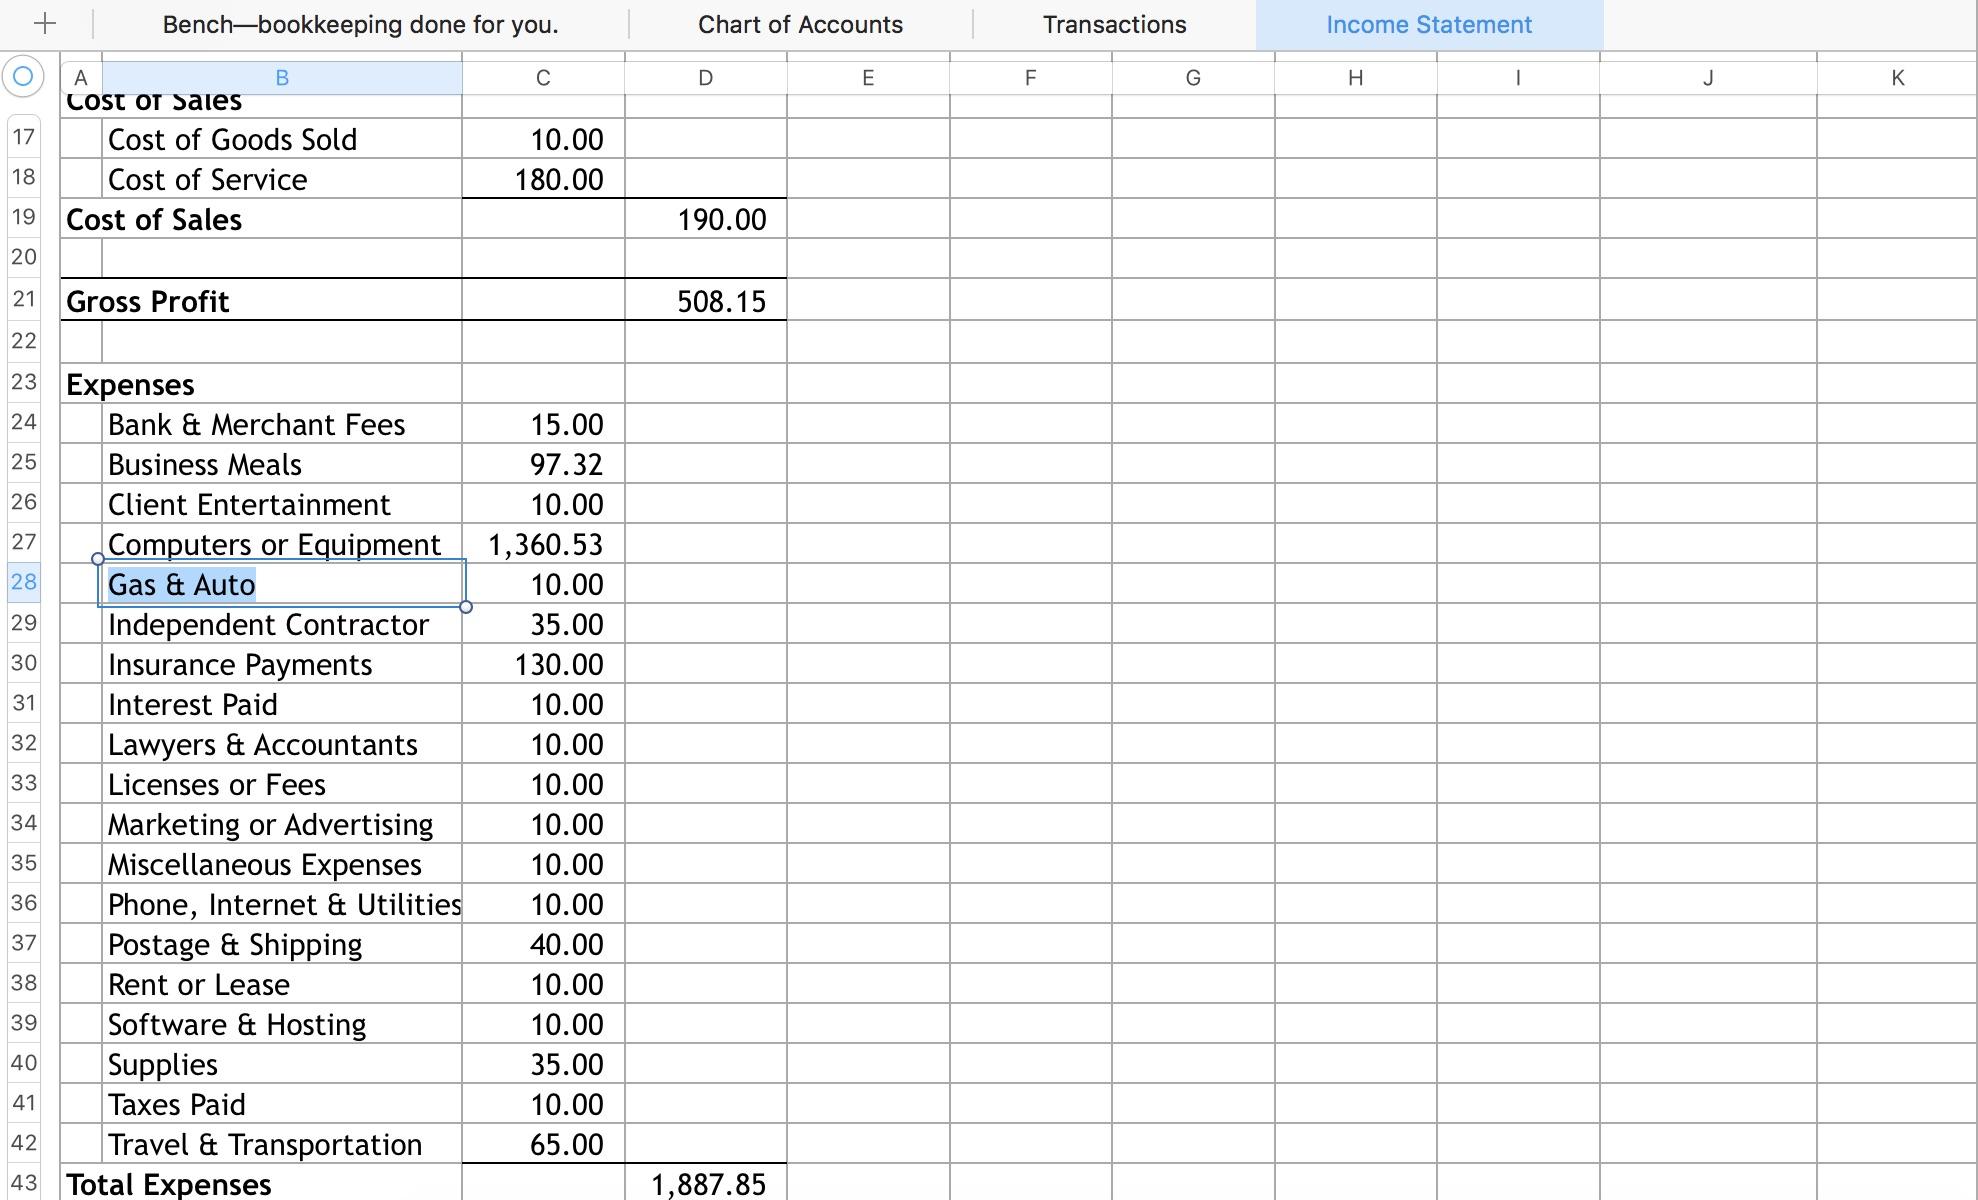 chart-of-accounts-excel-template-free-download-qlerobeach